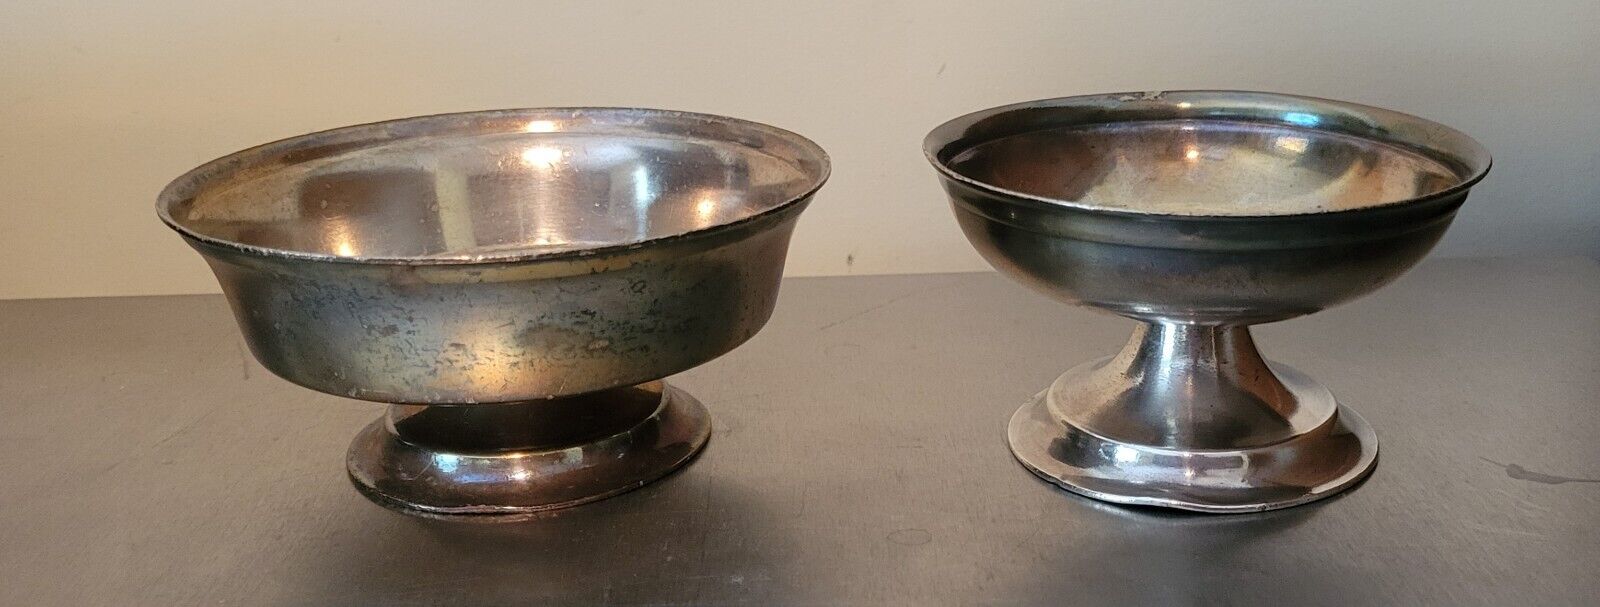 Two Vintage Victor S. Co  Silver Soldered Footed Bowls R0161 62 R 0164 62